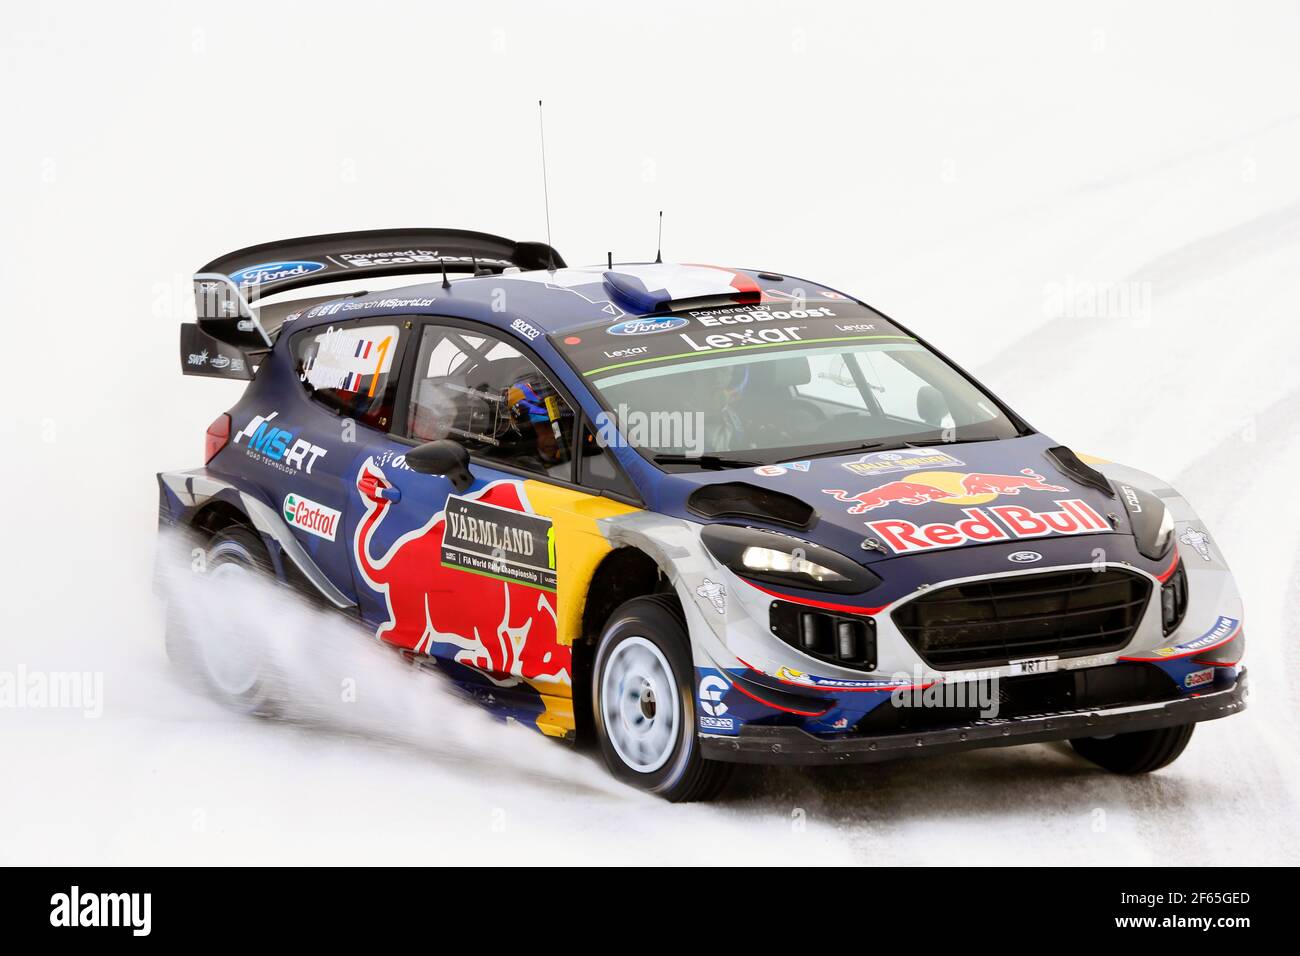 01 M-Sport World Rally Team, Ogier Sebastien, Ingrassia Julien, Ford Fiesta  WRC in action during the 2017 WRC World Rally Car Championship, Sweden rally  from February 9 to 12, at Hagfors -